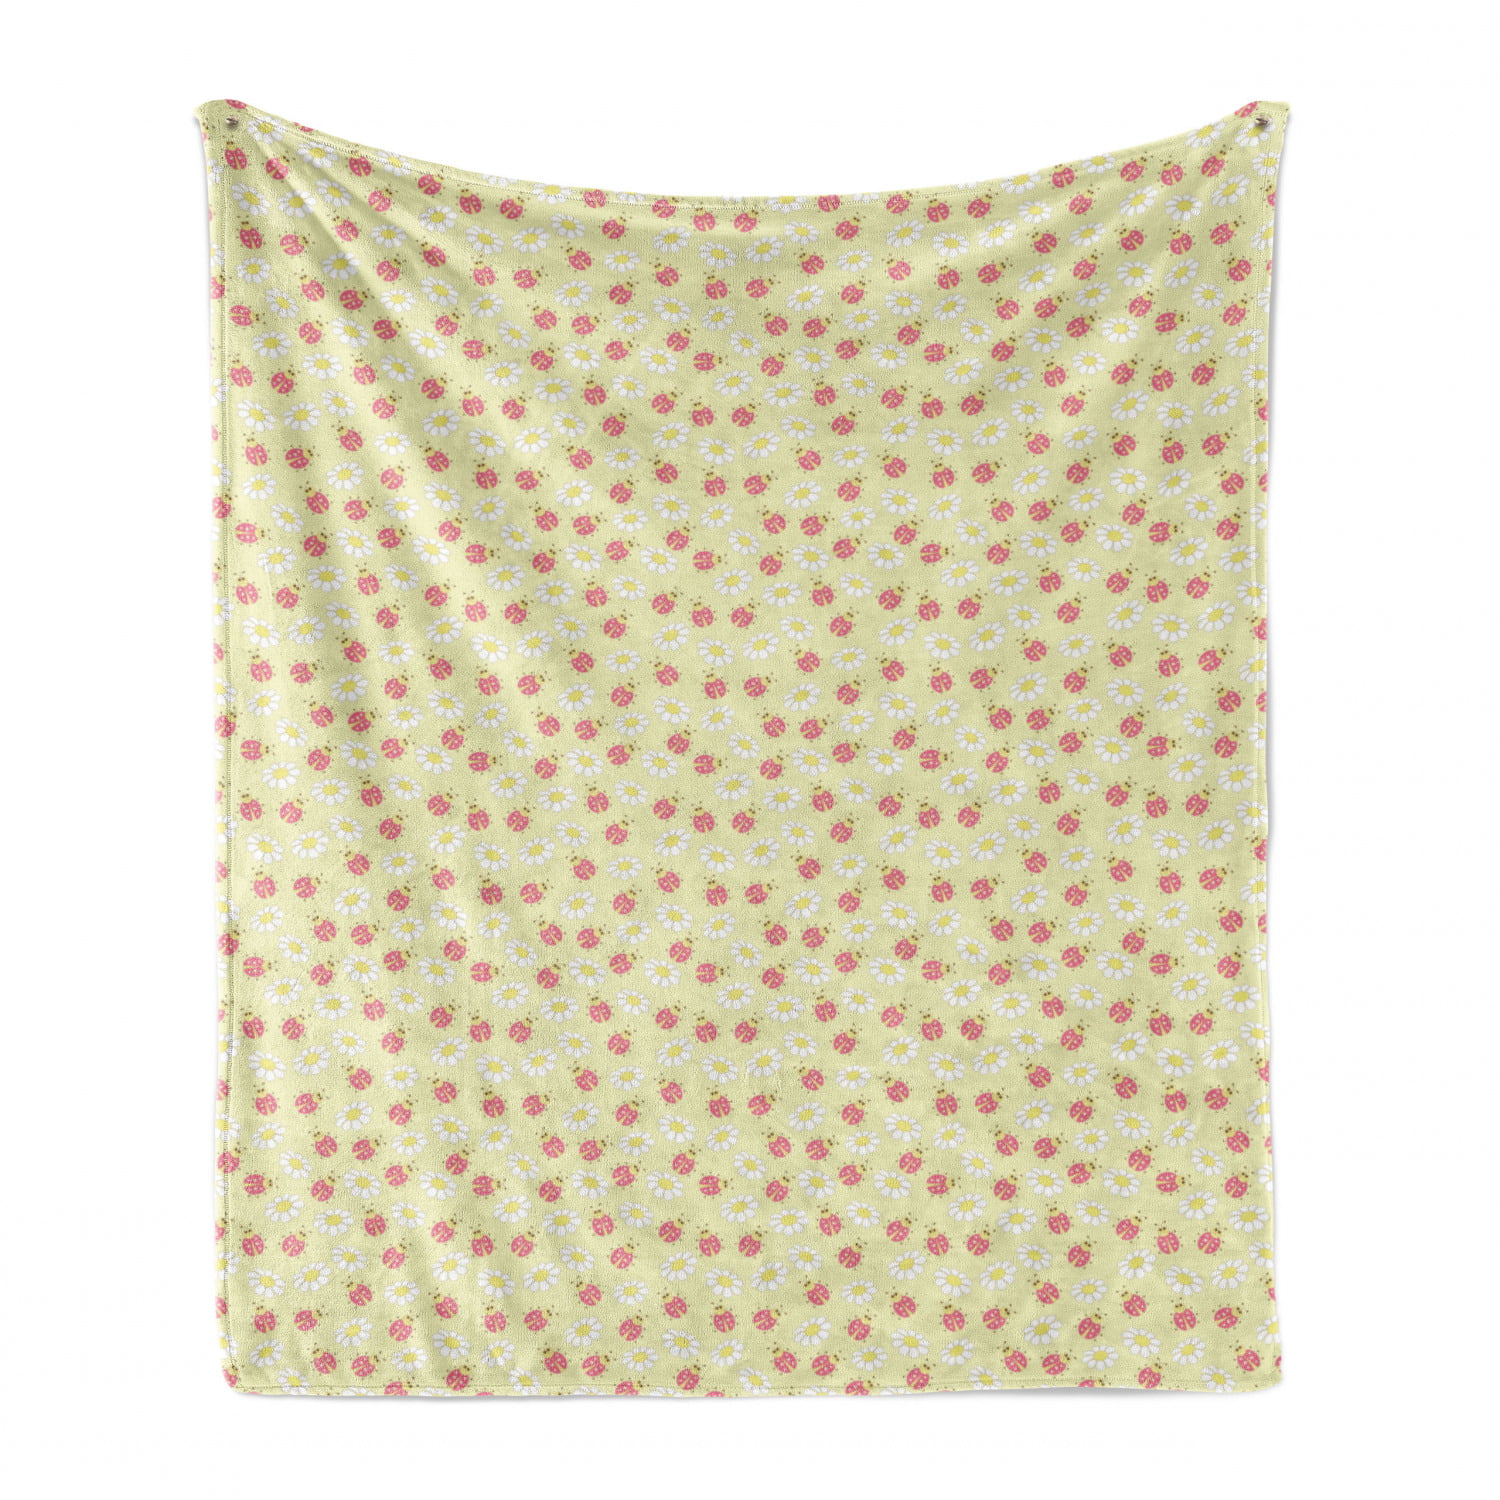 Flannel Fleece Blanket Full Size Ladybugs and Daisies Blanket,All-Season Plush Blanket for Couch Bed Travelling Camping Or Kids Adults 80X60